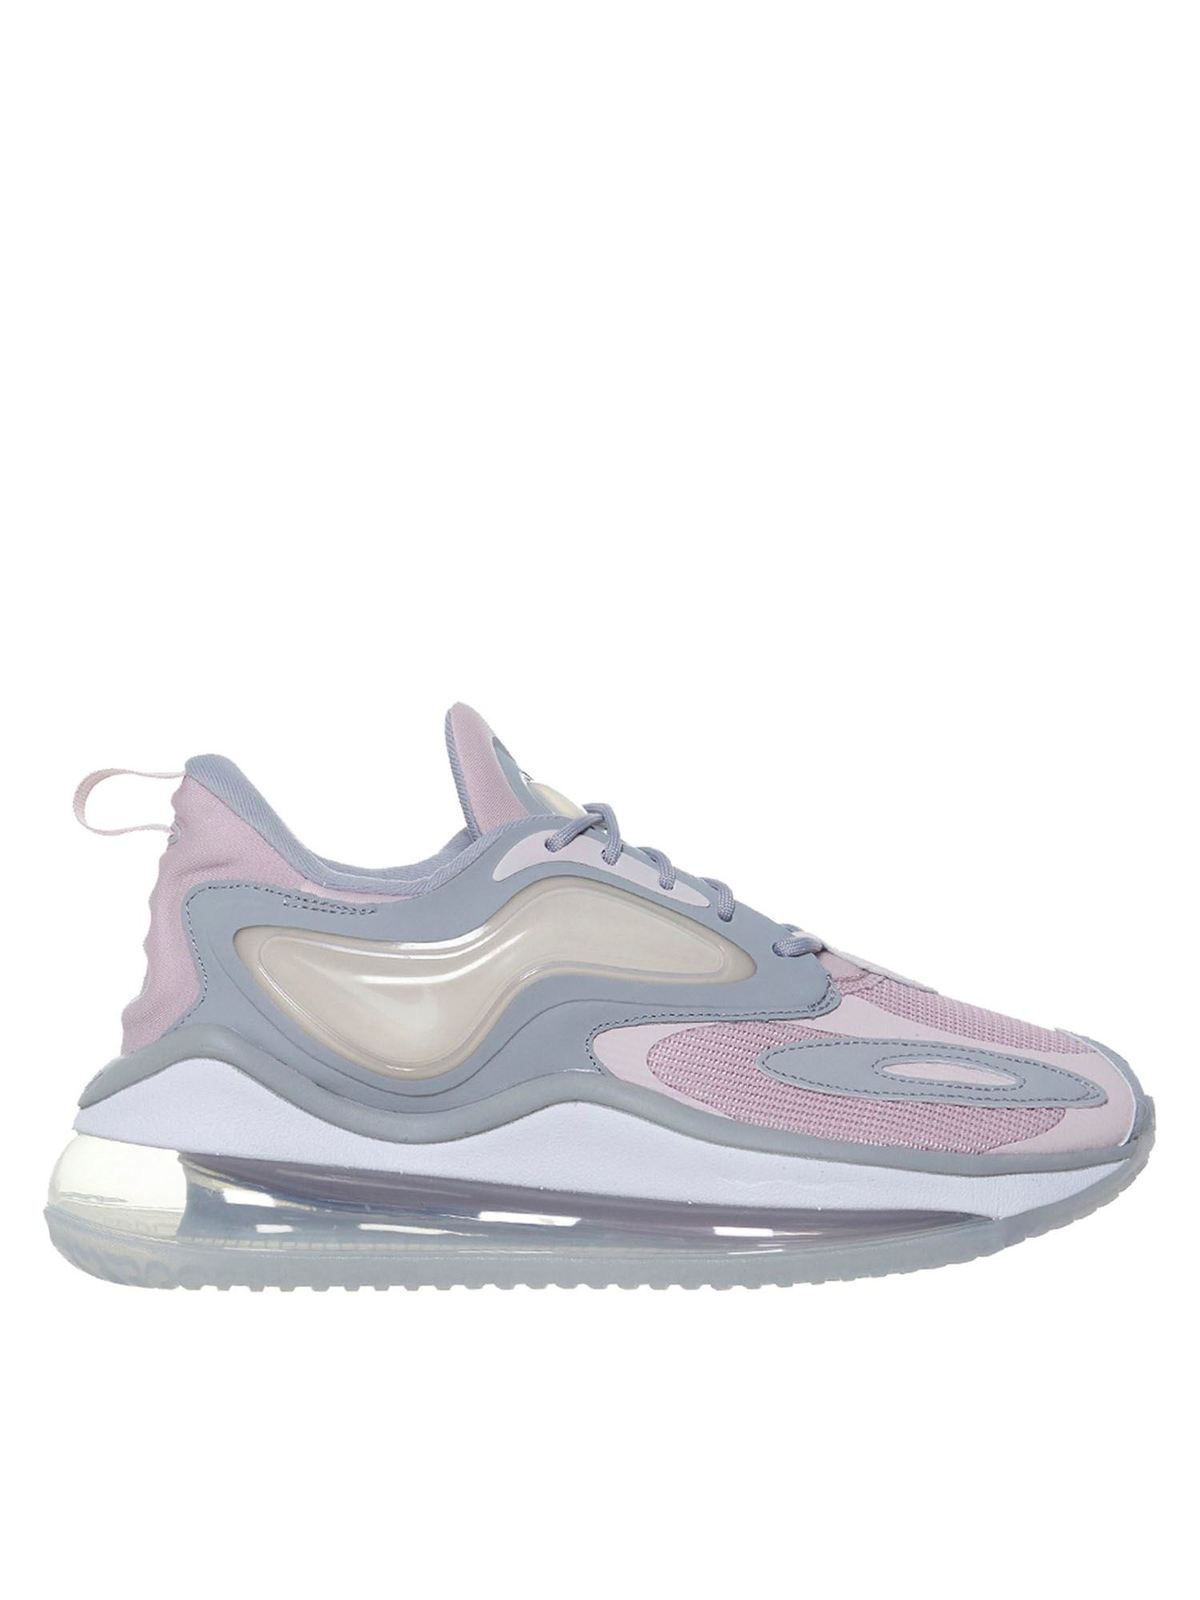 NIKE AIR MAX ZEPHYR SNEAKERS IN PINK AND GRAY